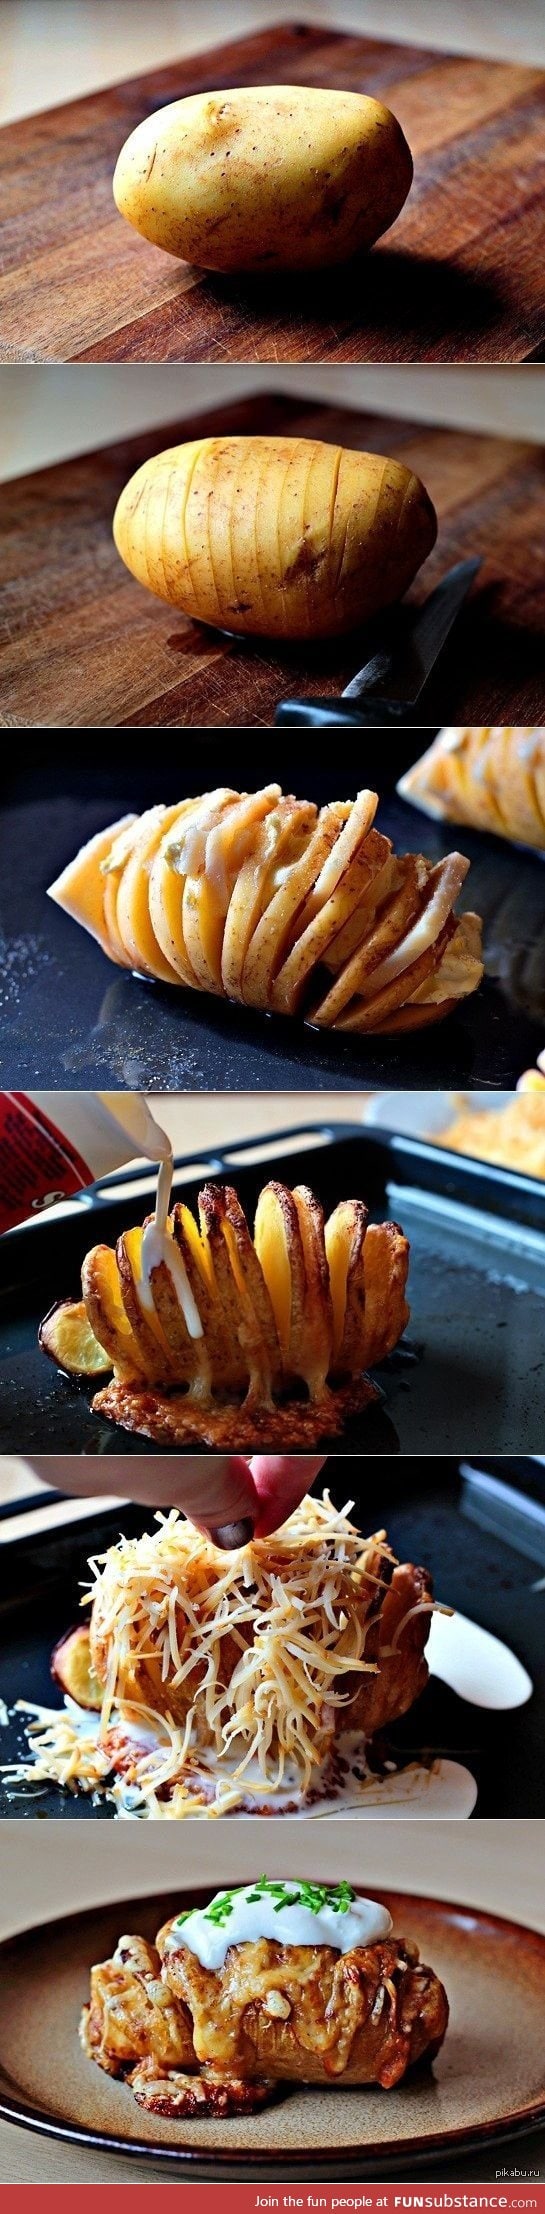 Great way to make a baked potato